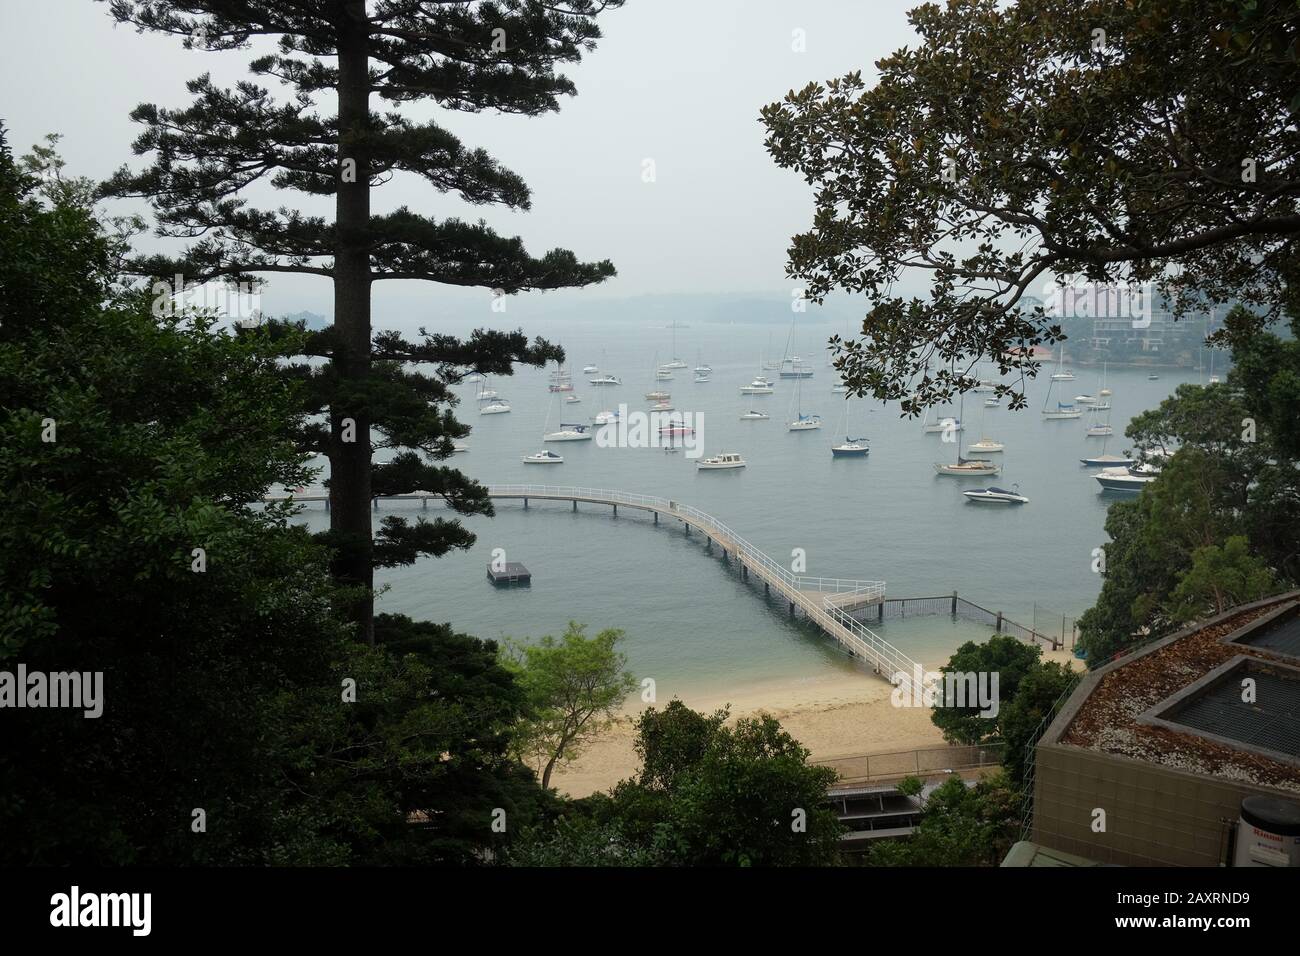 Climate Change Australia Looking through trees and bushfire smoke haze hanging over moored boats, Redleaf beach and Murray Rose pool on Sydney Harbour Stock Photo